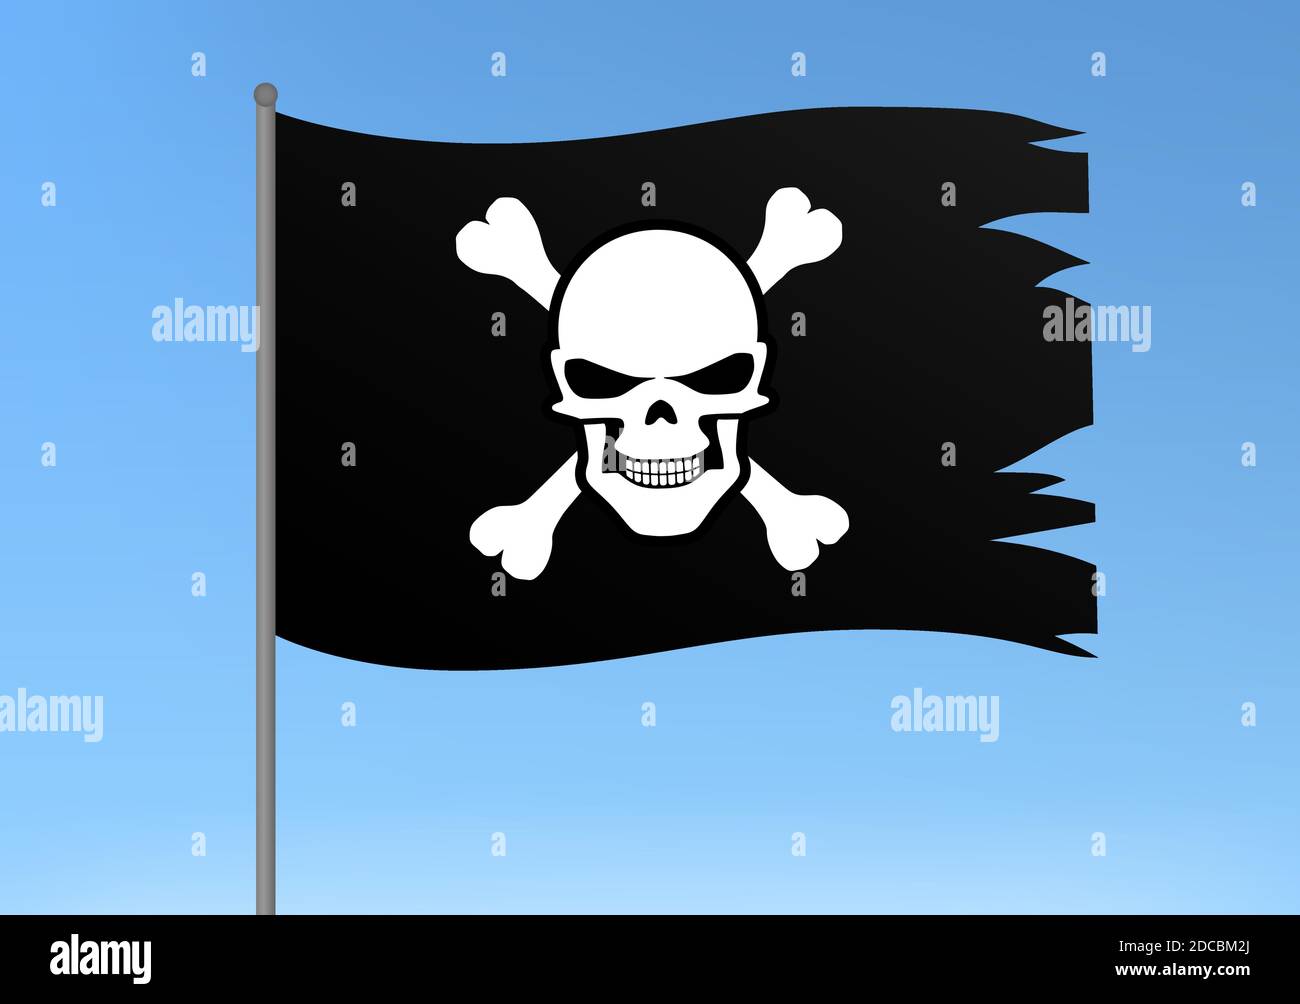 Black pirate flag with skull and crossbones symbol vector illustration Stock Vector